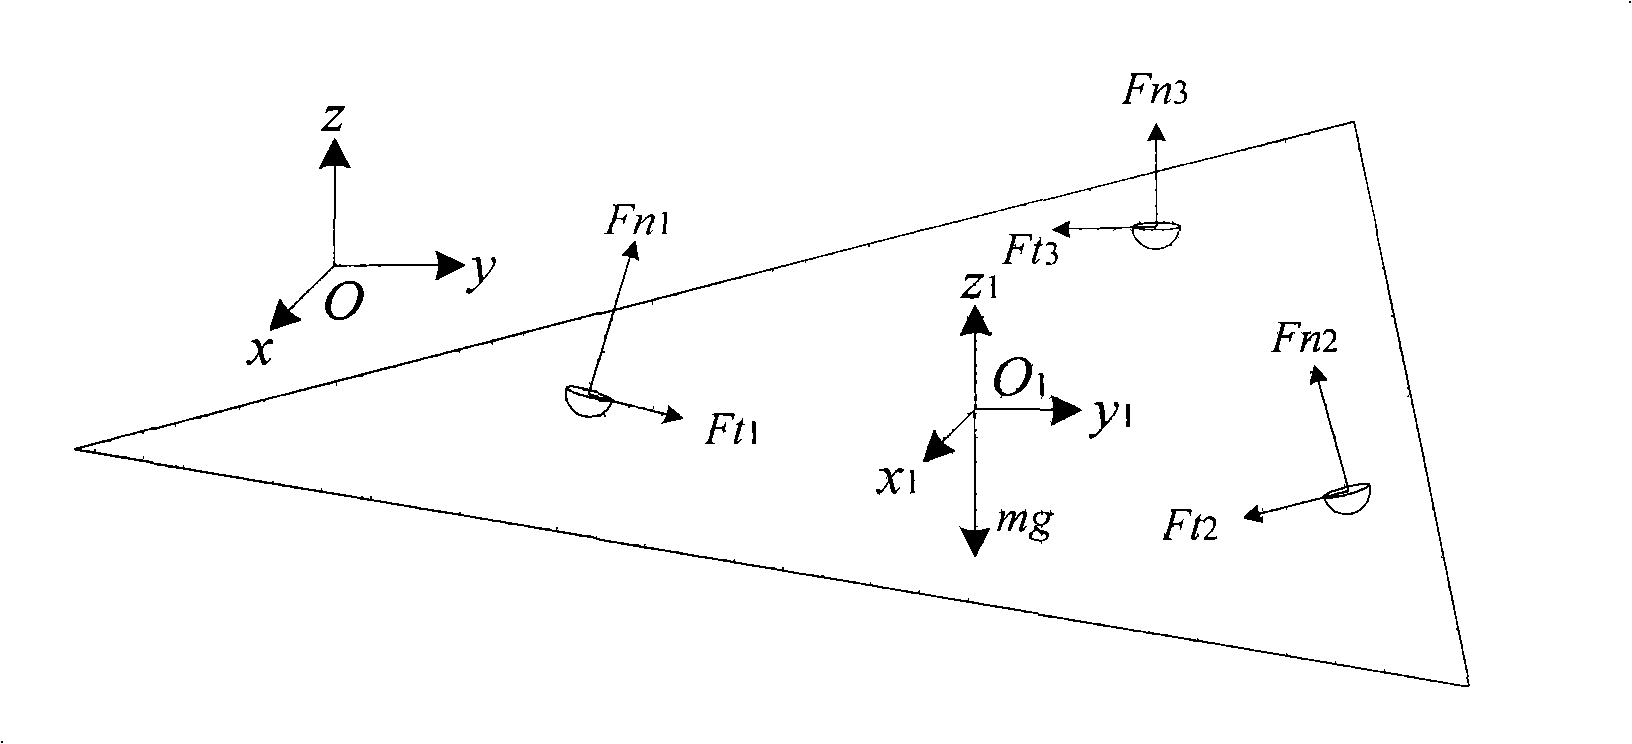 Three 3-axis localizer-based method for safely (stably) adjusting pose of airfoil member